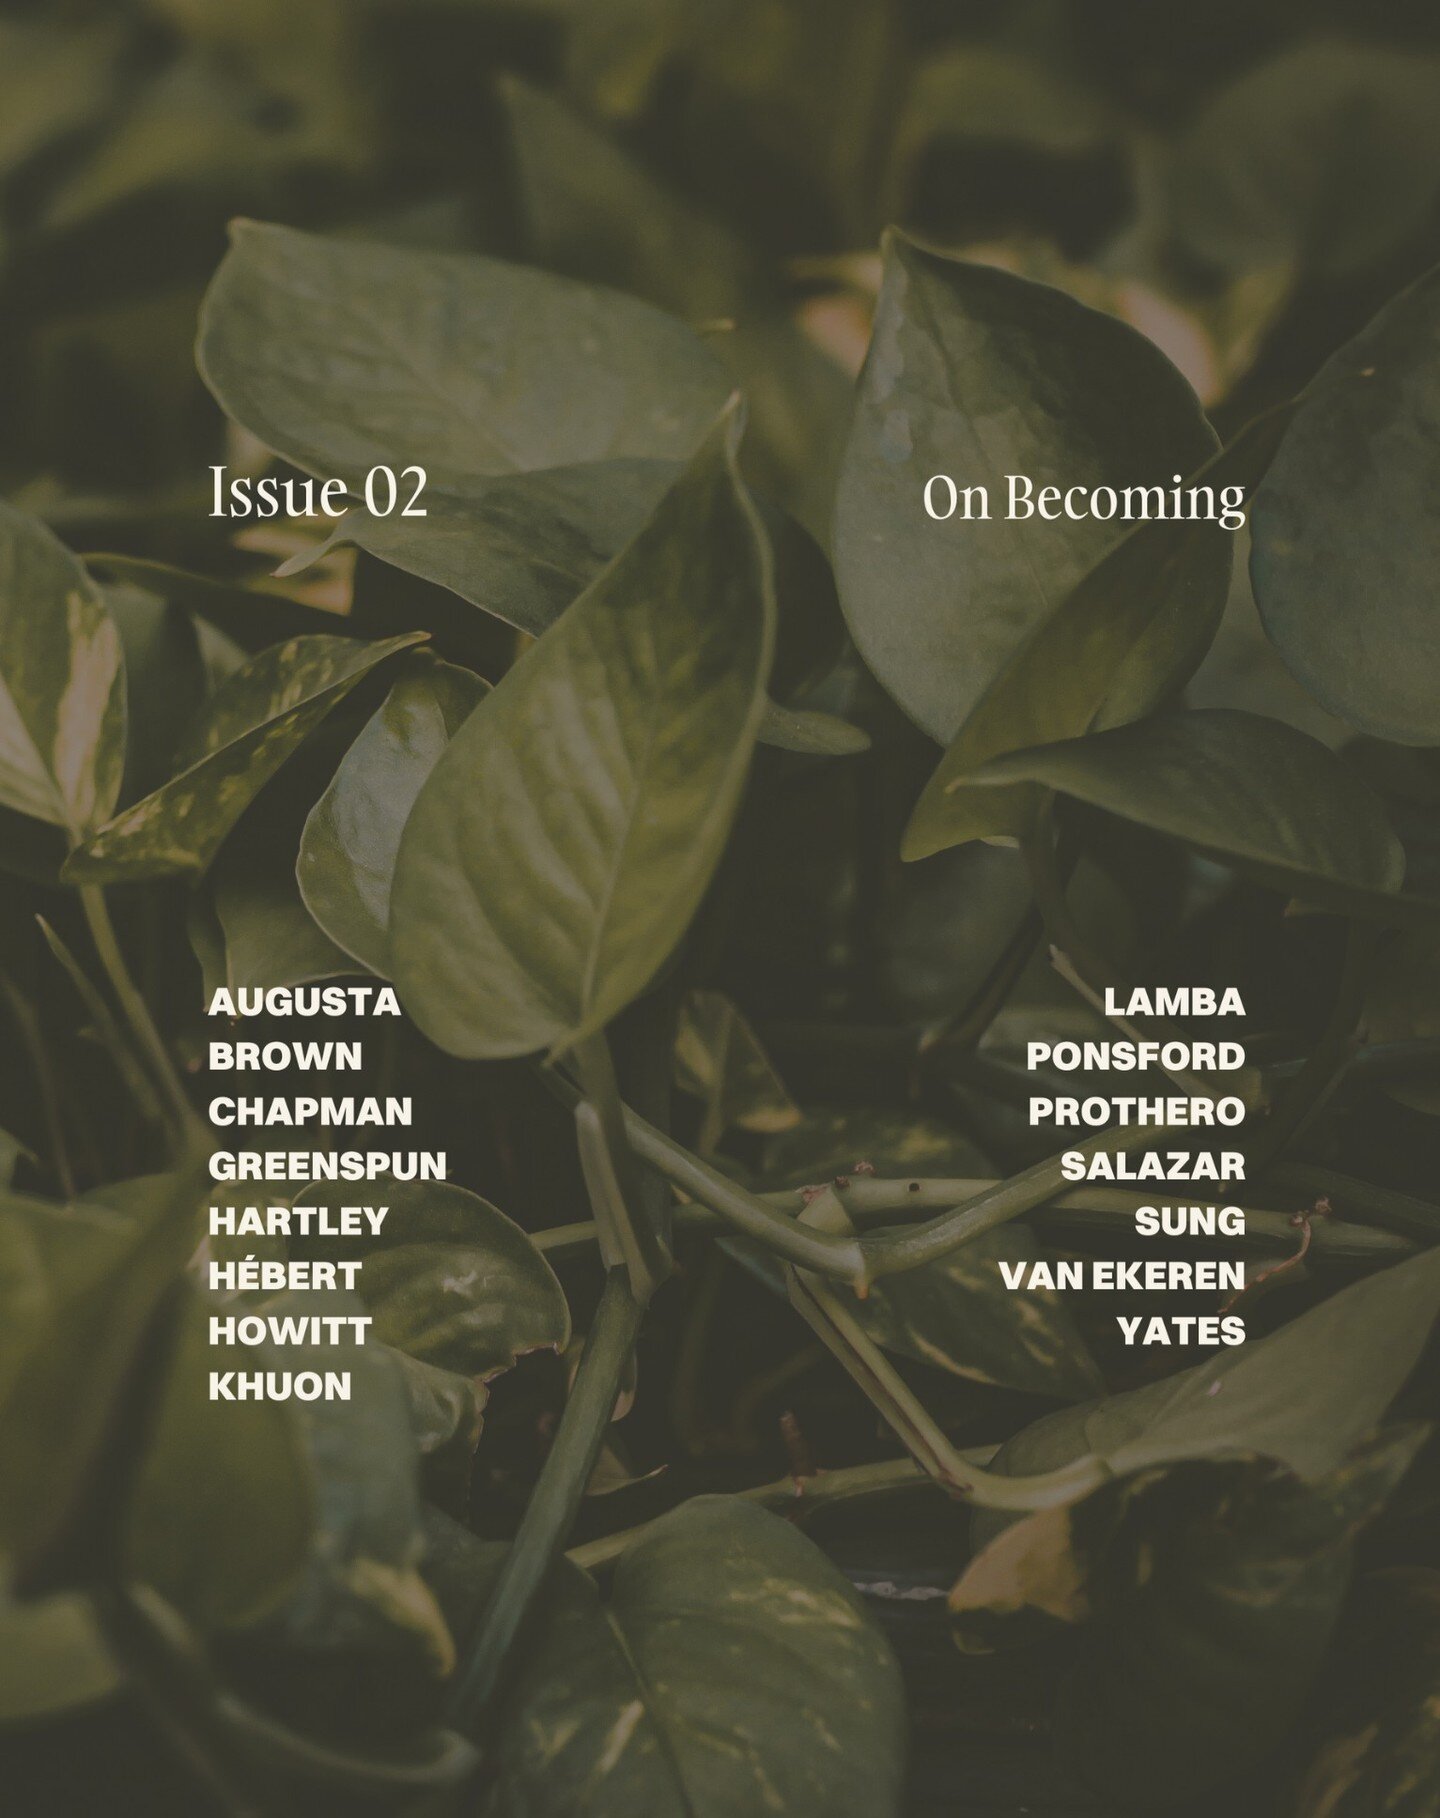 Hot off the press! Get your copy of Issue 02, up on the website today.

Incredibly proud to publish these 15 authors.